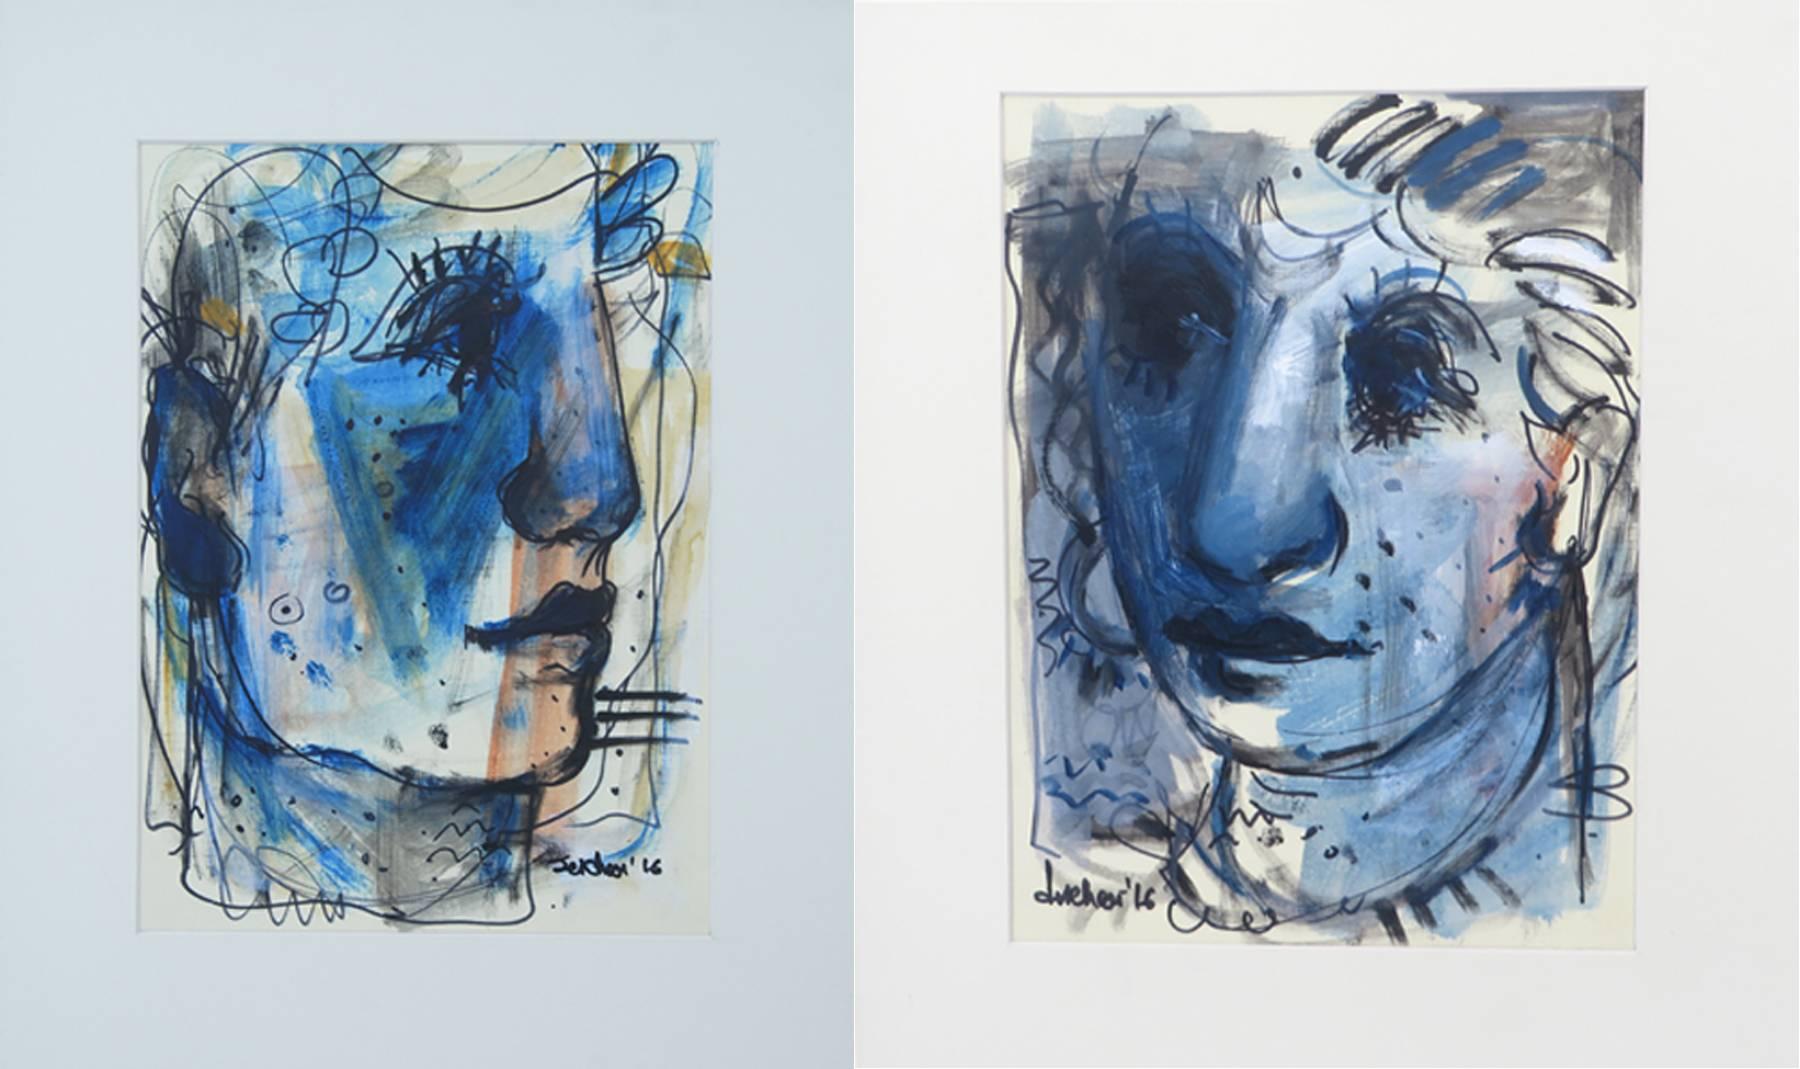 Sekhar Kar Figurative Painting - Couple, Faces, Mixed Media, Blue, Black, White by Indian Artist "In Stock"